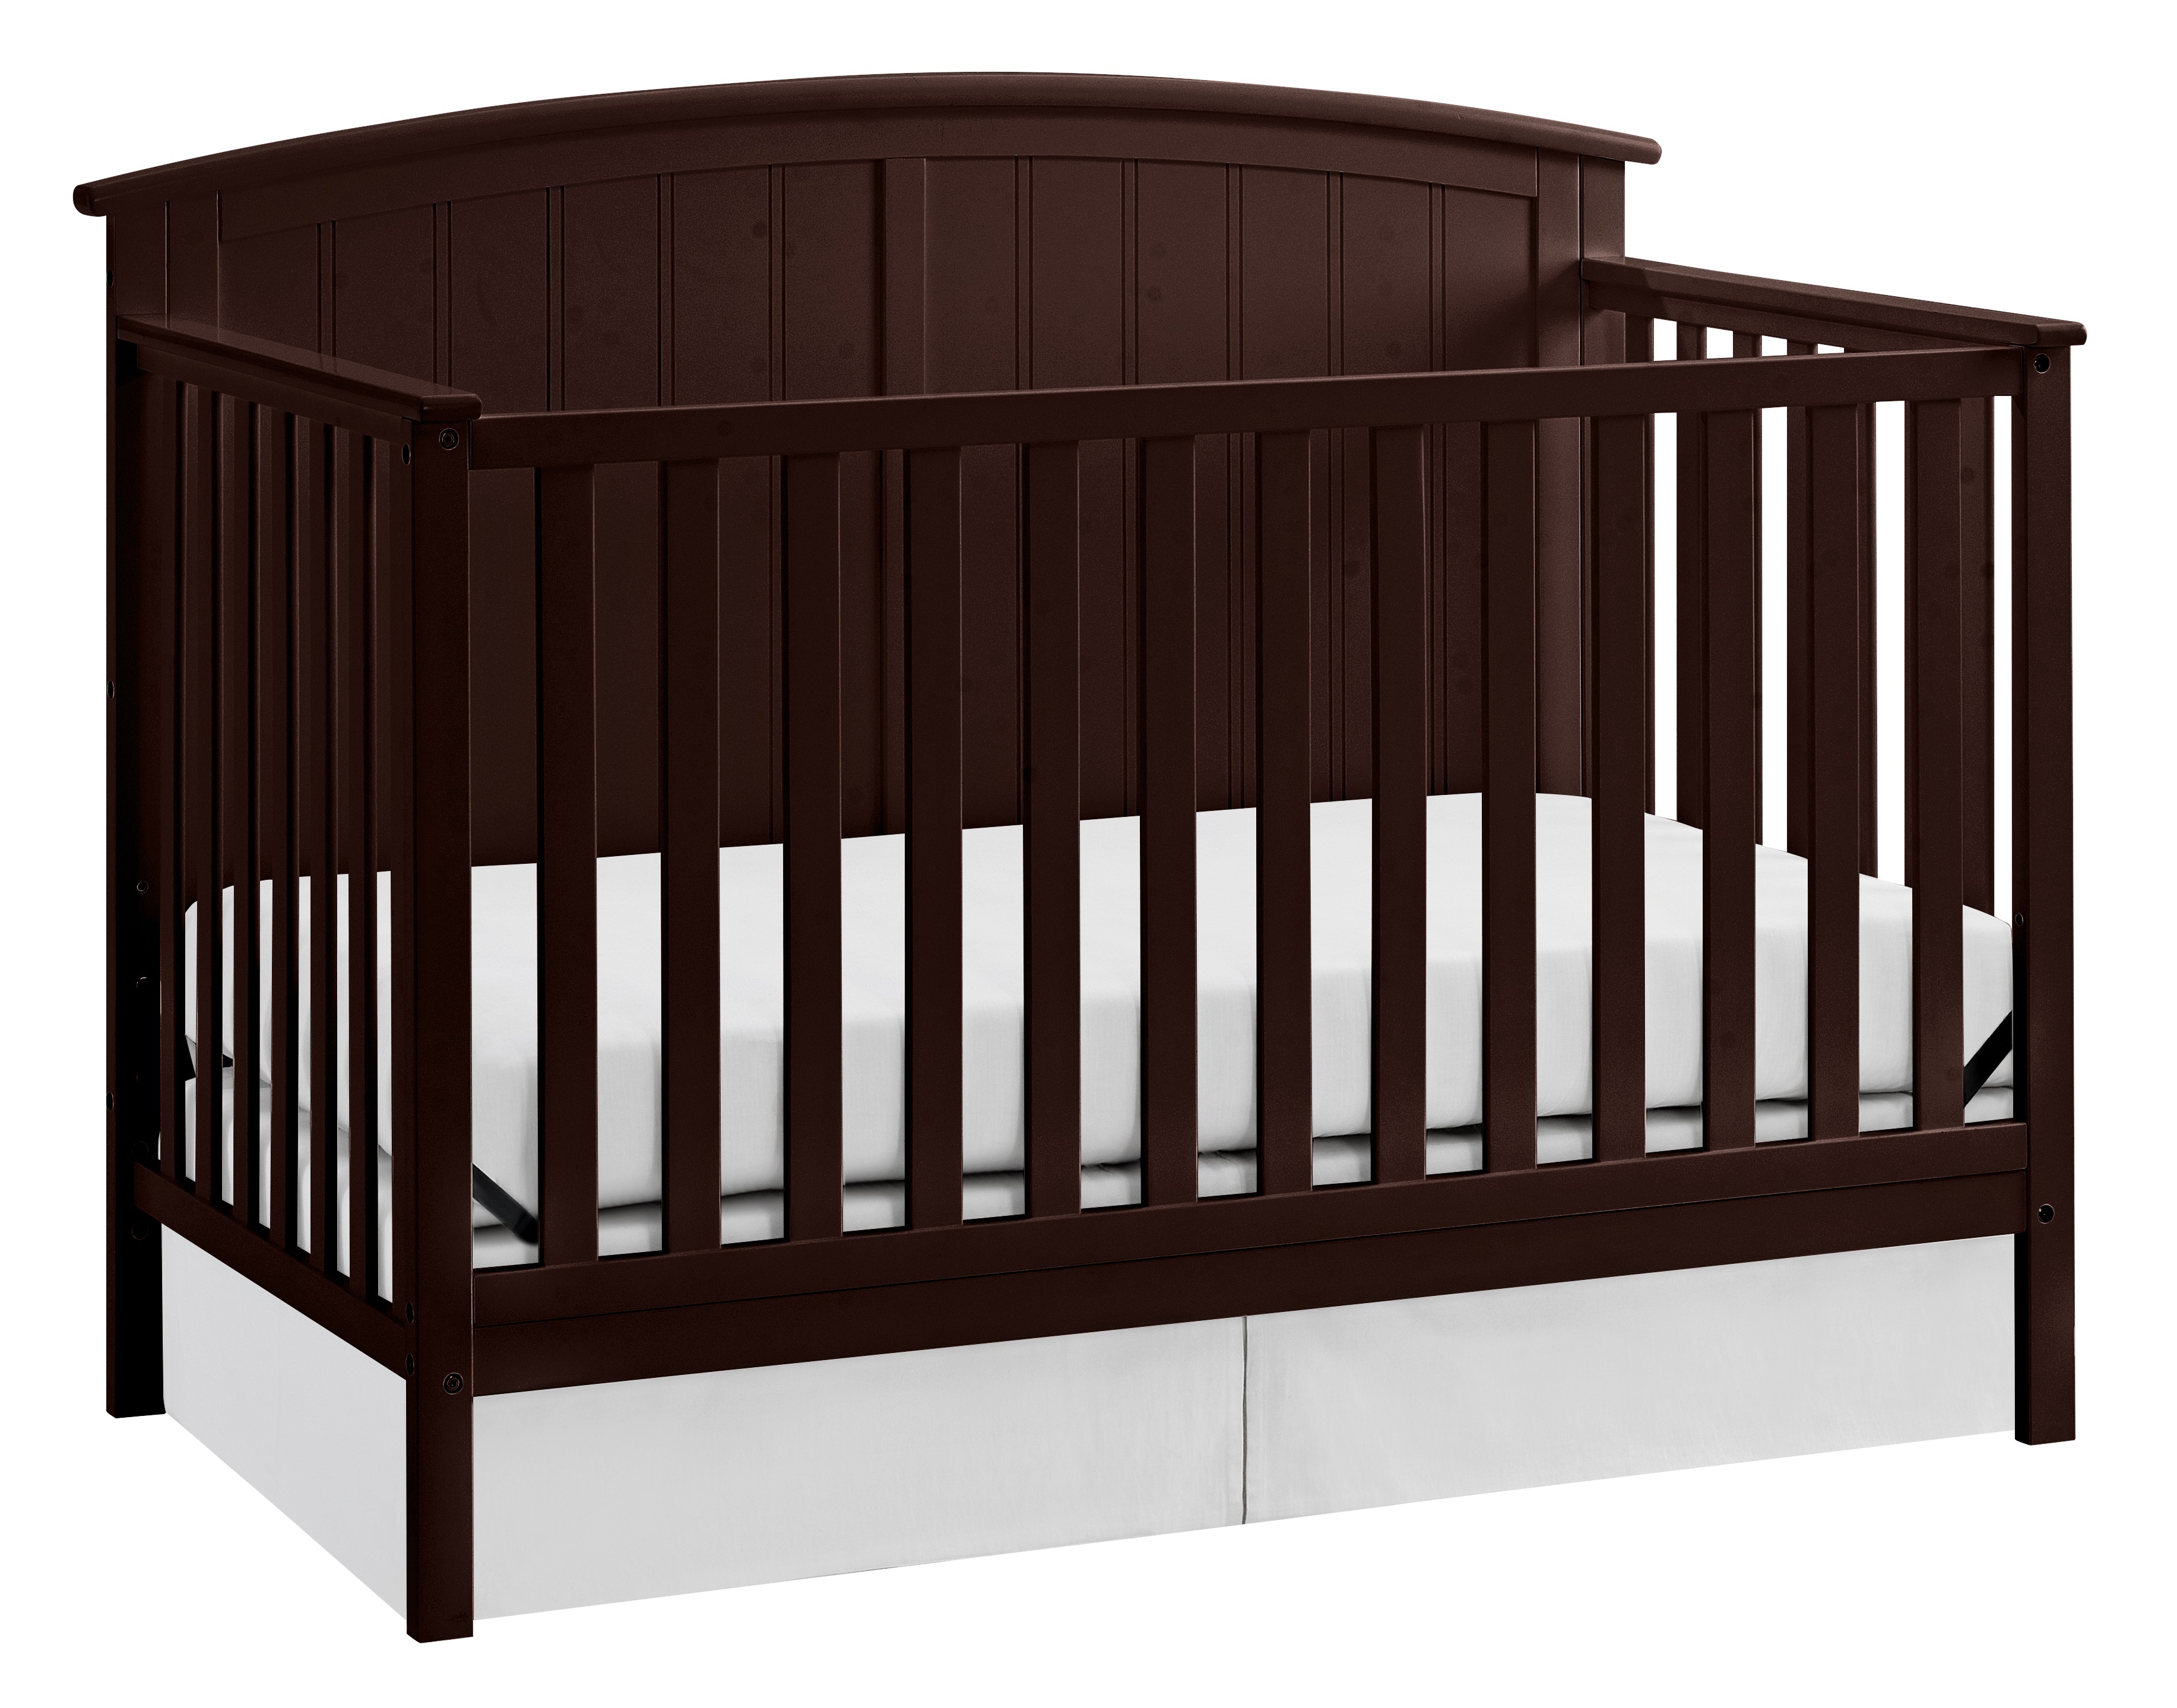 Baby Furniture: Buy Baby Furniture In 